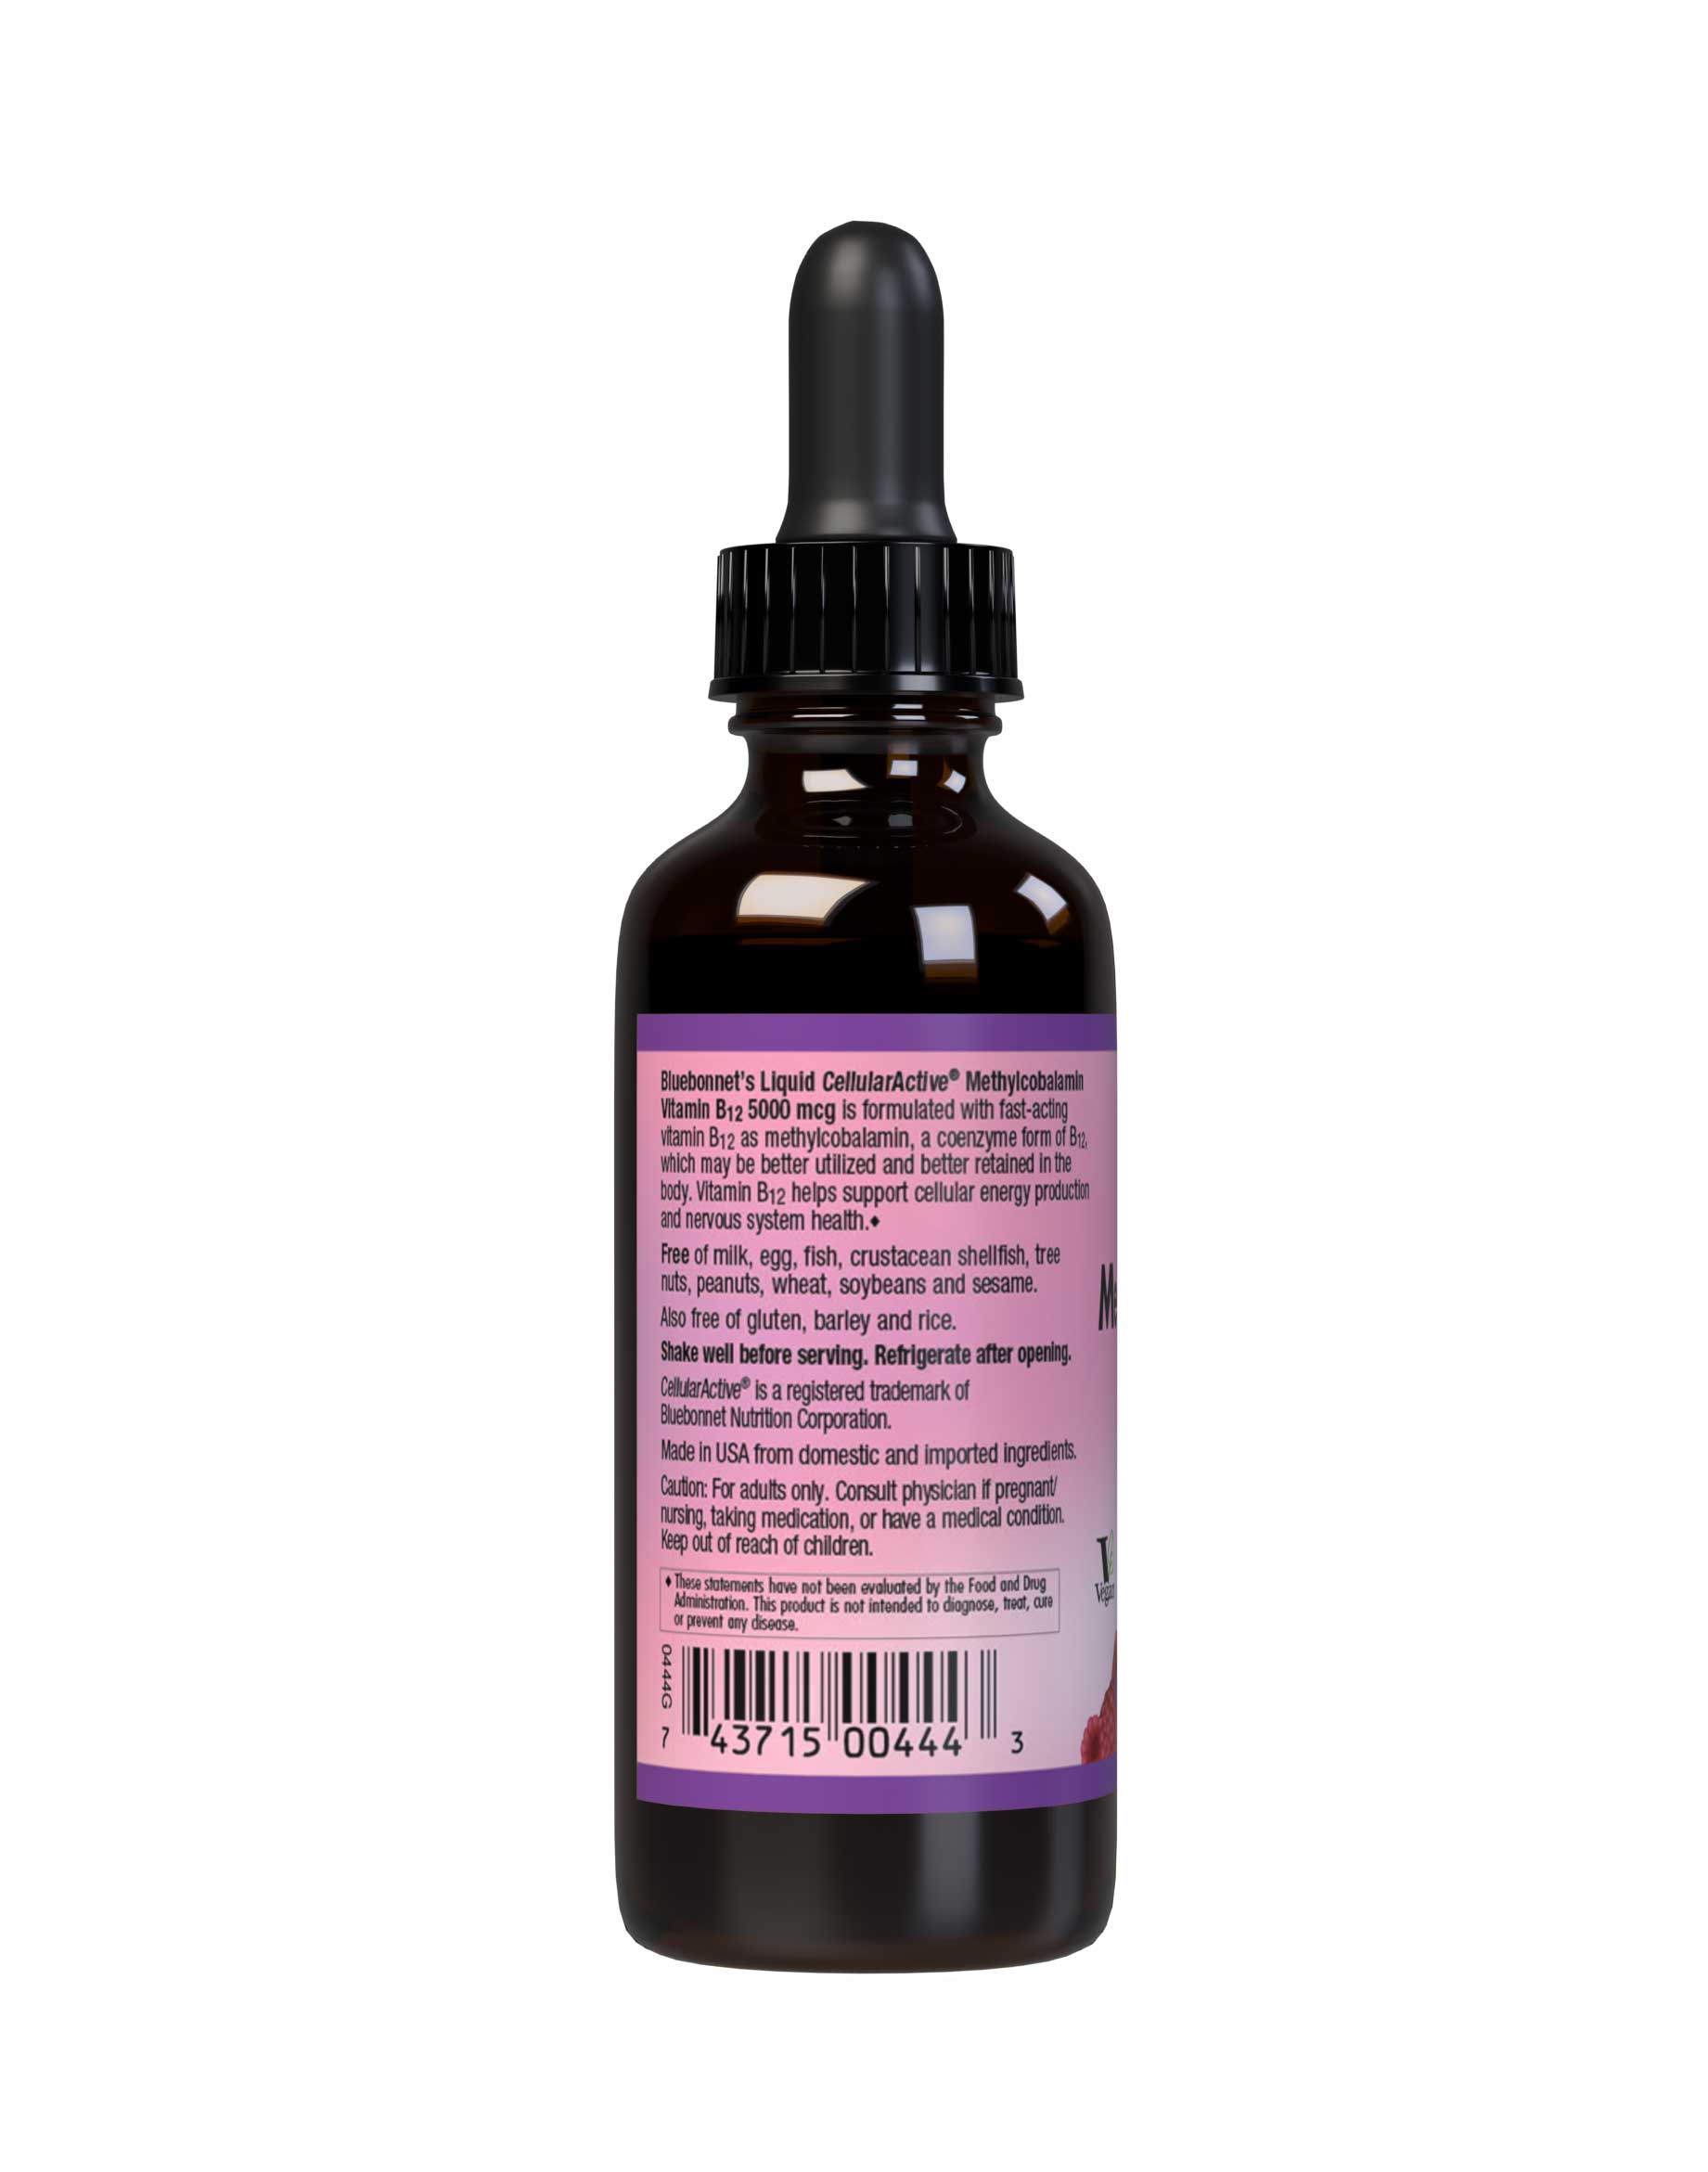 Bluebonnet’s Liquid CellularActive Methylcobalamin Vitamin B12 5000 mcg is formulated with fast-acting vitamin B12 as methylcobalamin, a coenzyme form of B12, which may be better utilized and better retained in the body. Vitamin B12 supports cellular energy production and nervous system health . Description panel. #size_2 fl oz